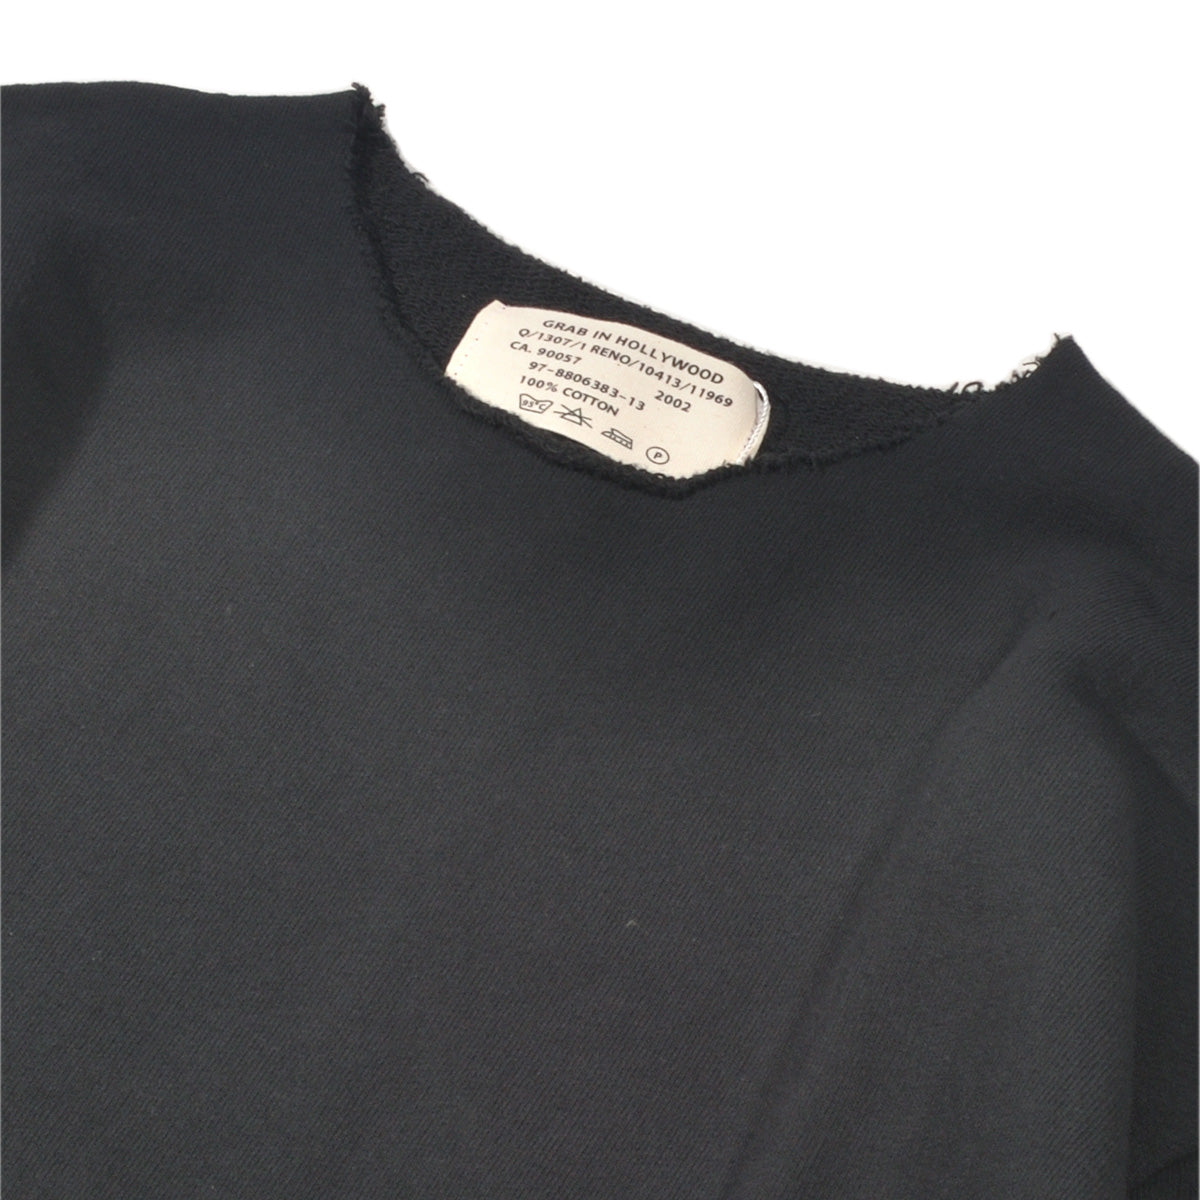 VINTAGE FRENCH TERRY RELAX FIT ALL CUT L/S[ビンテージフレンチテリー リラックスフィット オールカット長袖]BLACK